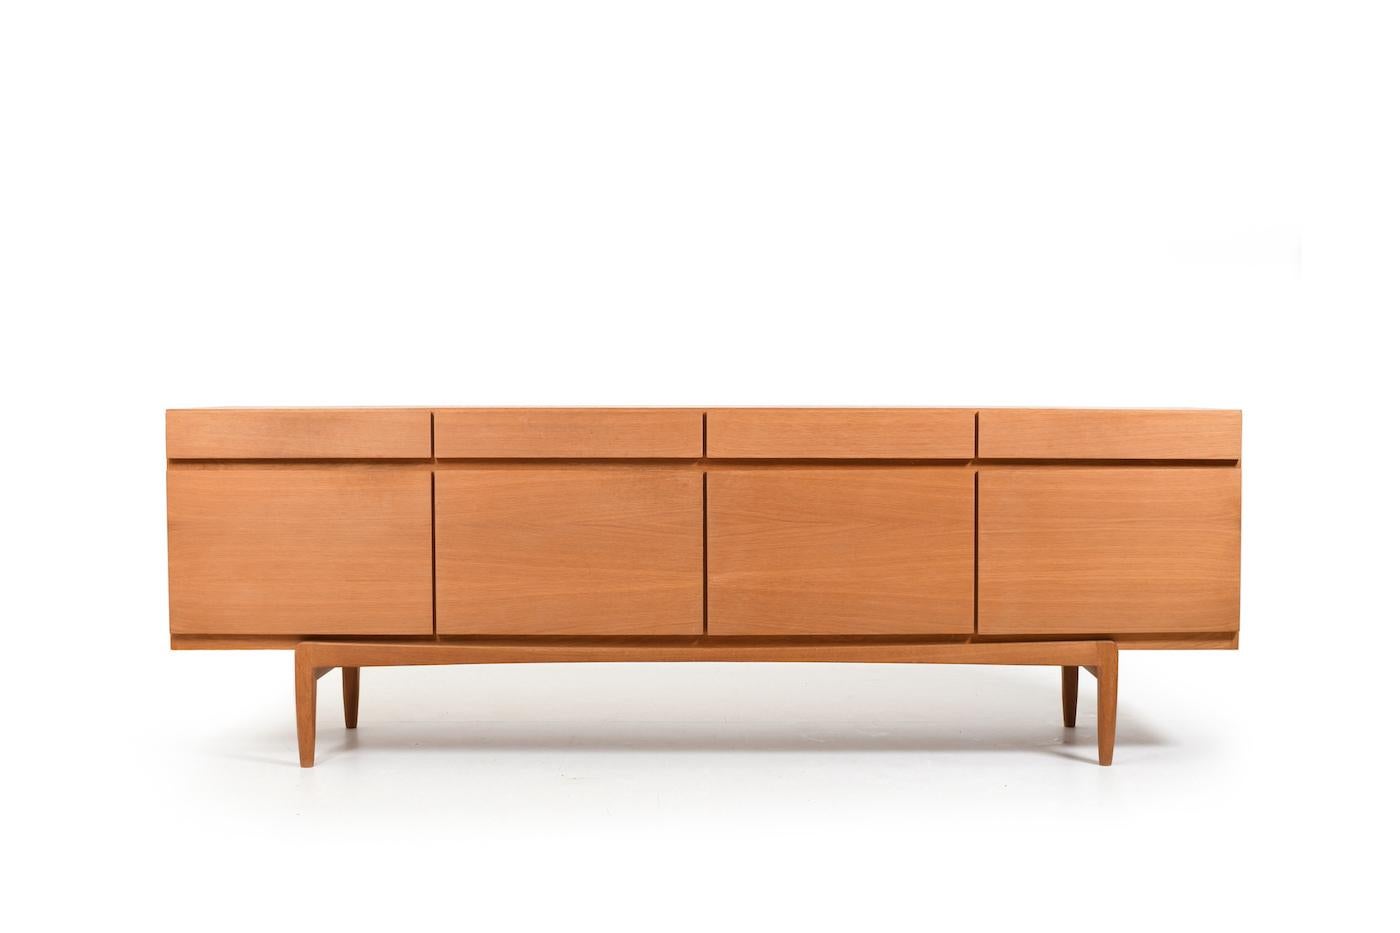 Fine danish sideboard in oak, model FA66 by Ib Kofod-Larsen for Faarup Møbelfabrik Denmark 1963. In front with 4 doors and 4 drawers above. Behind one door with more drawers with green filt. High quality danish production. 1960s.